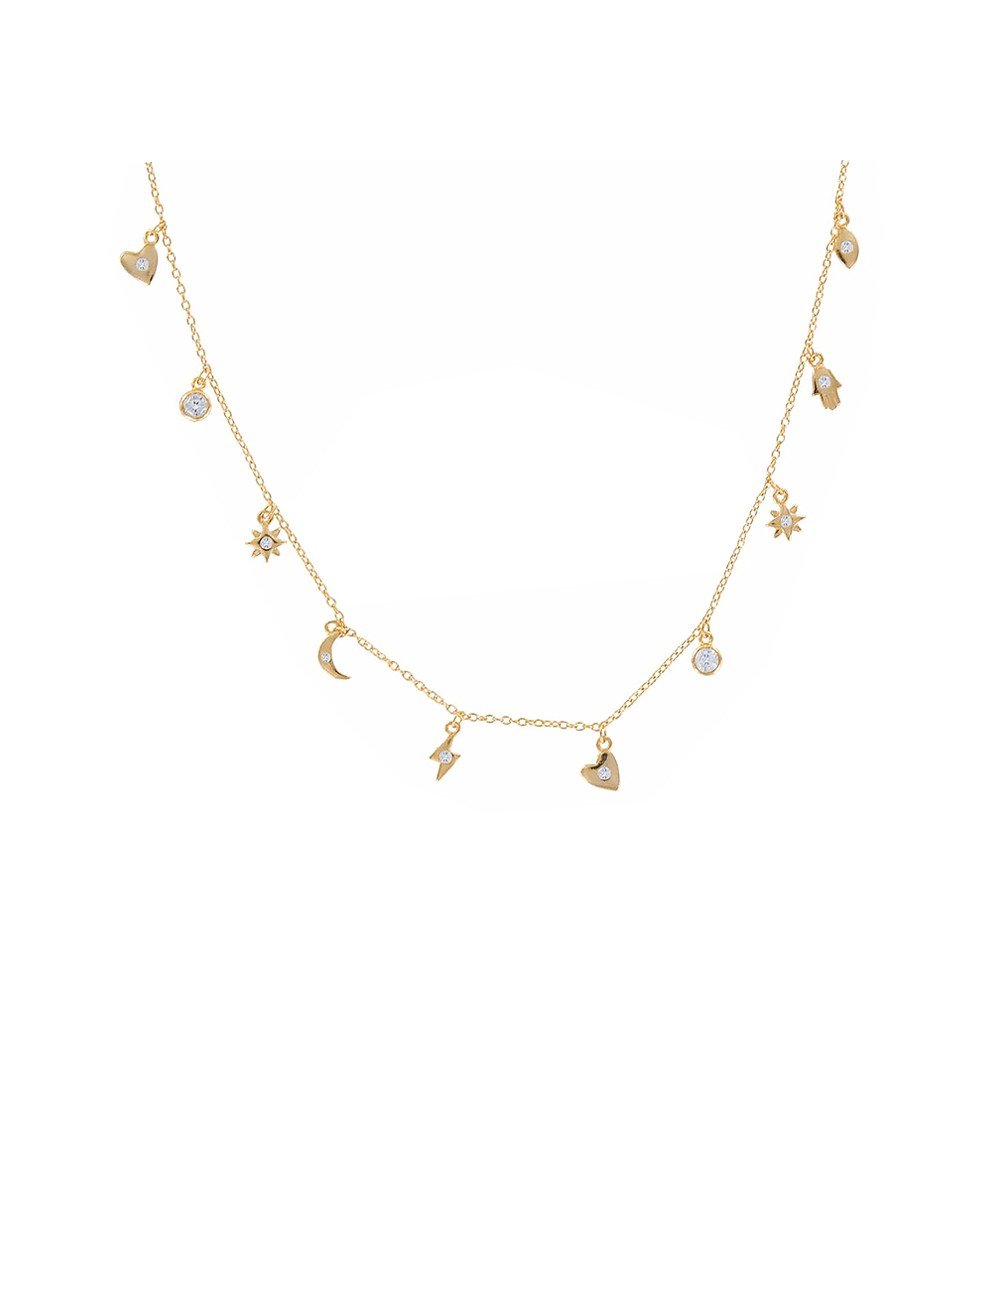 gold charm necklace